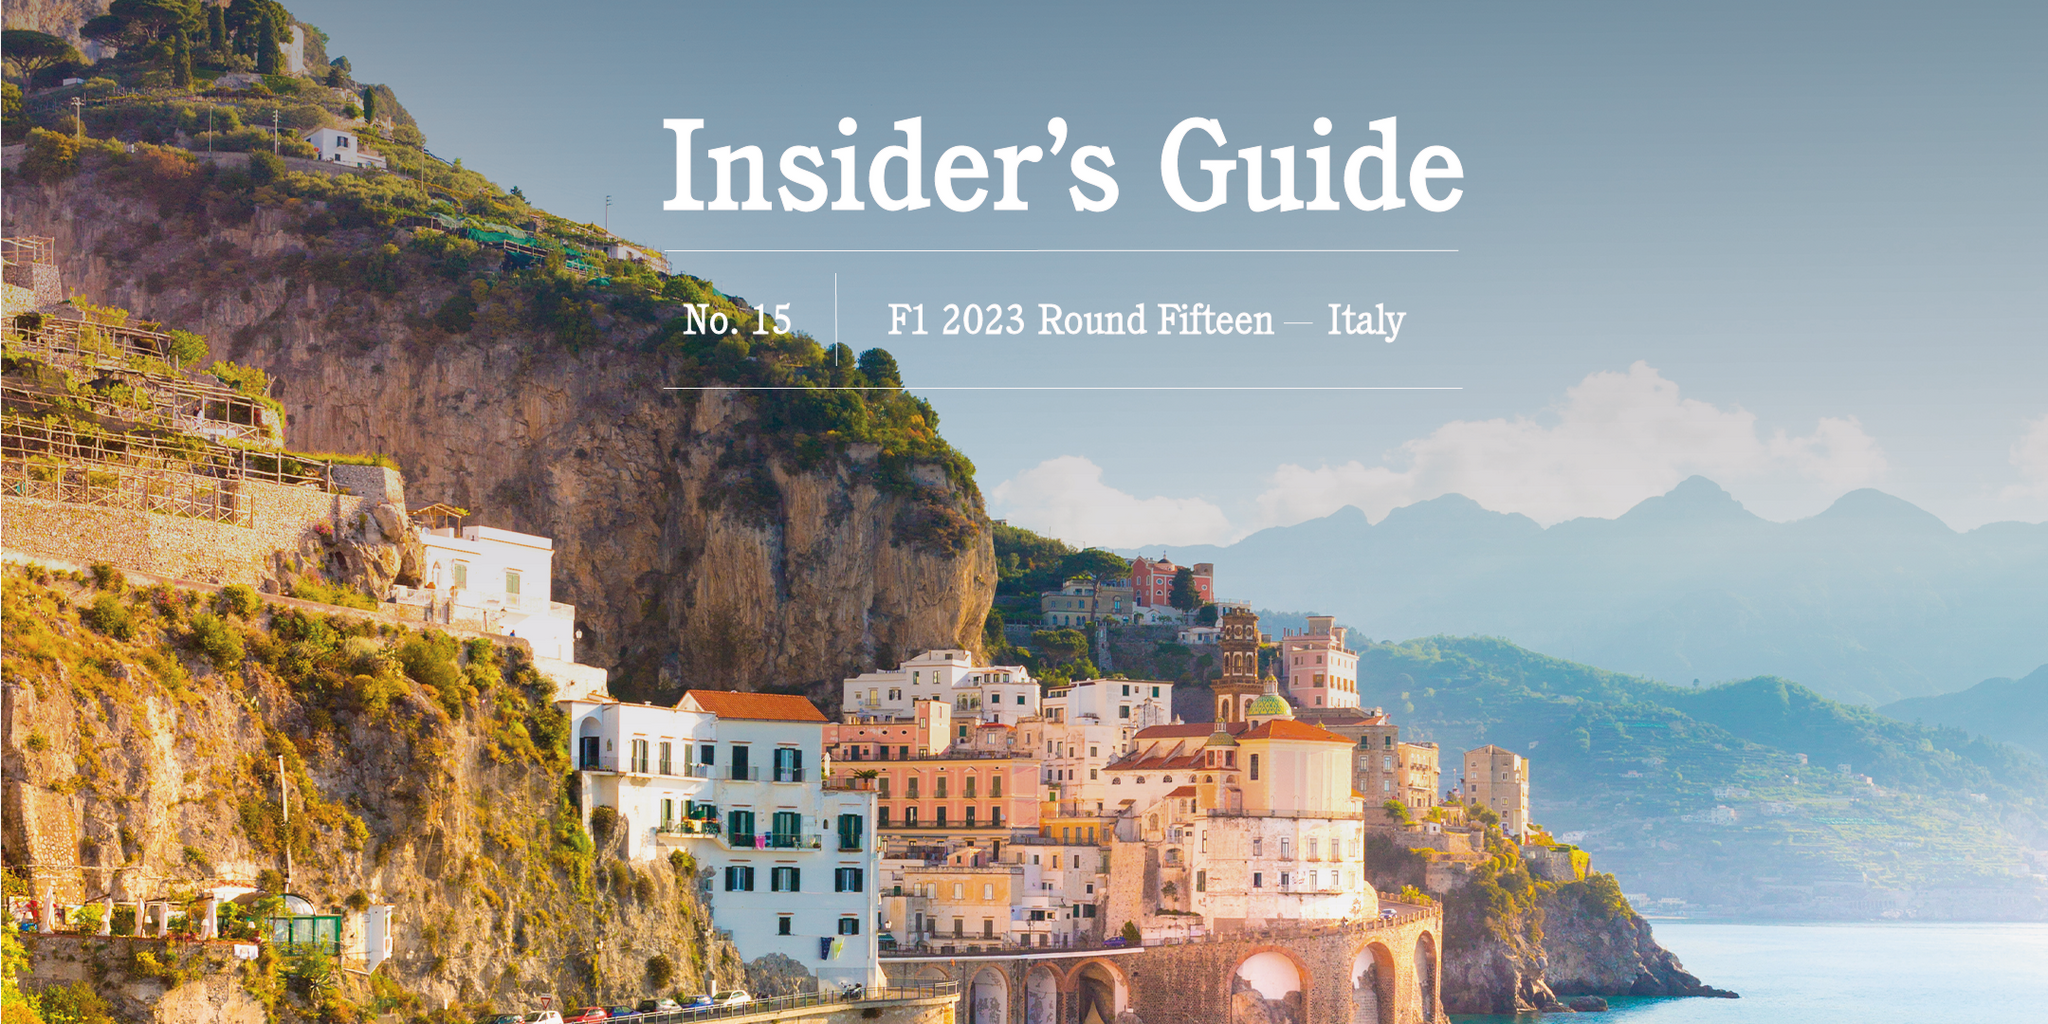 F1 2023 Insider's Guide No. 15 – Italy